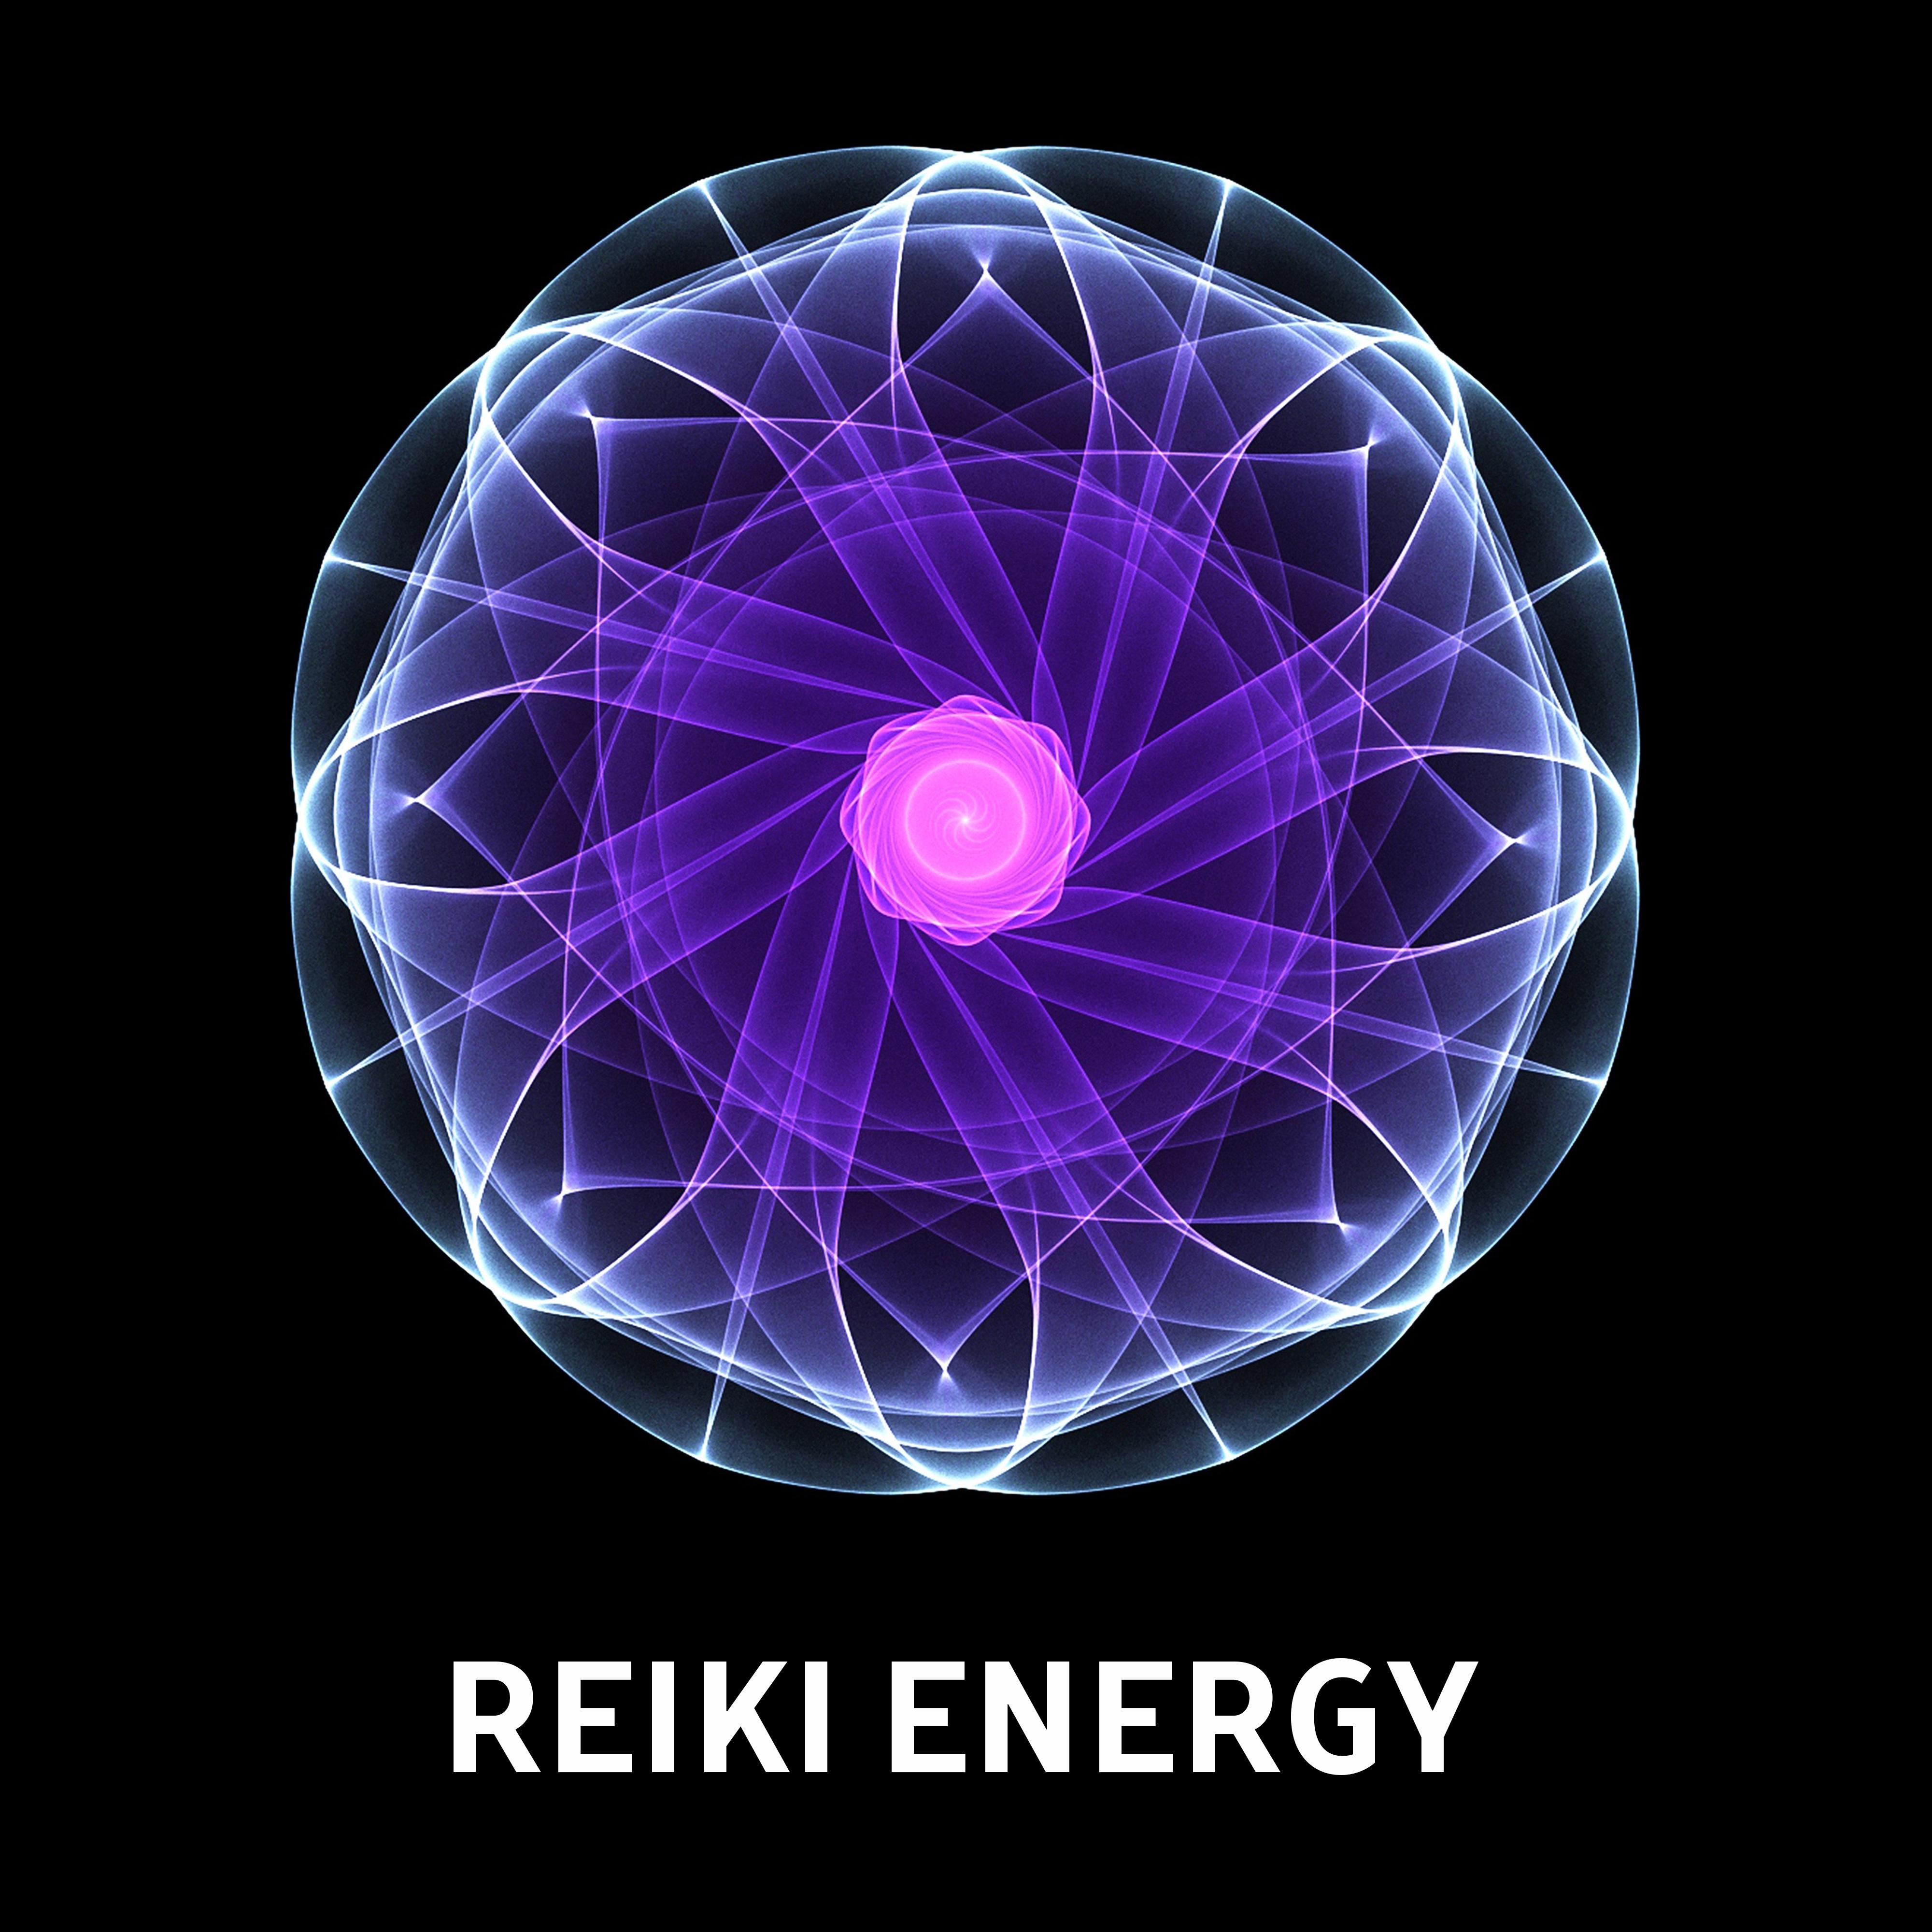 Reiki Energy – Calming Sounds of Nature, Asian Relaxation, Stress Relief, Deep Relaxation, New Age 2017